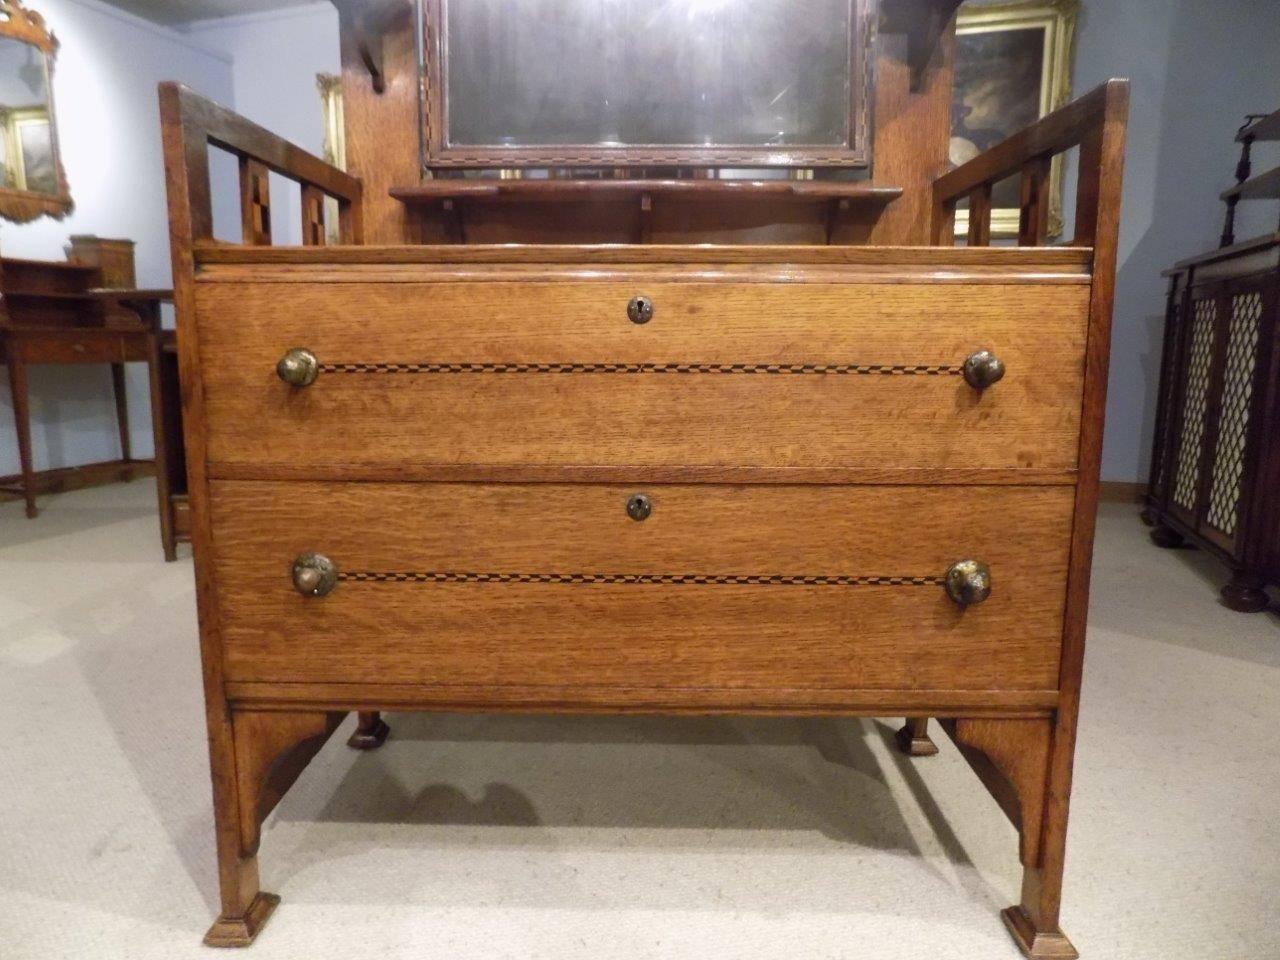 An oak Arts & Crafts period shapland and petter dressing table. The upper section with a rectangular bevelled mirror with chequer band inlay, marquetry inlaid supports and shaped shelves. The open ends having further marquetry inlaid panels. The